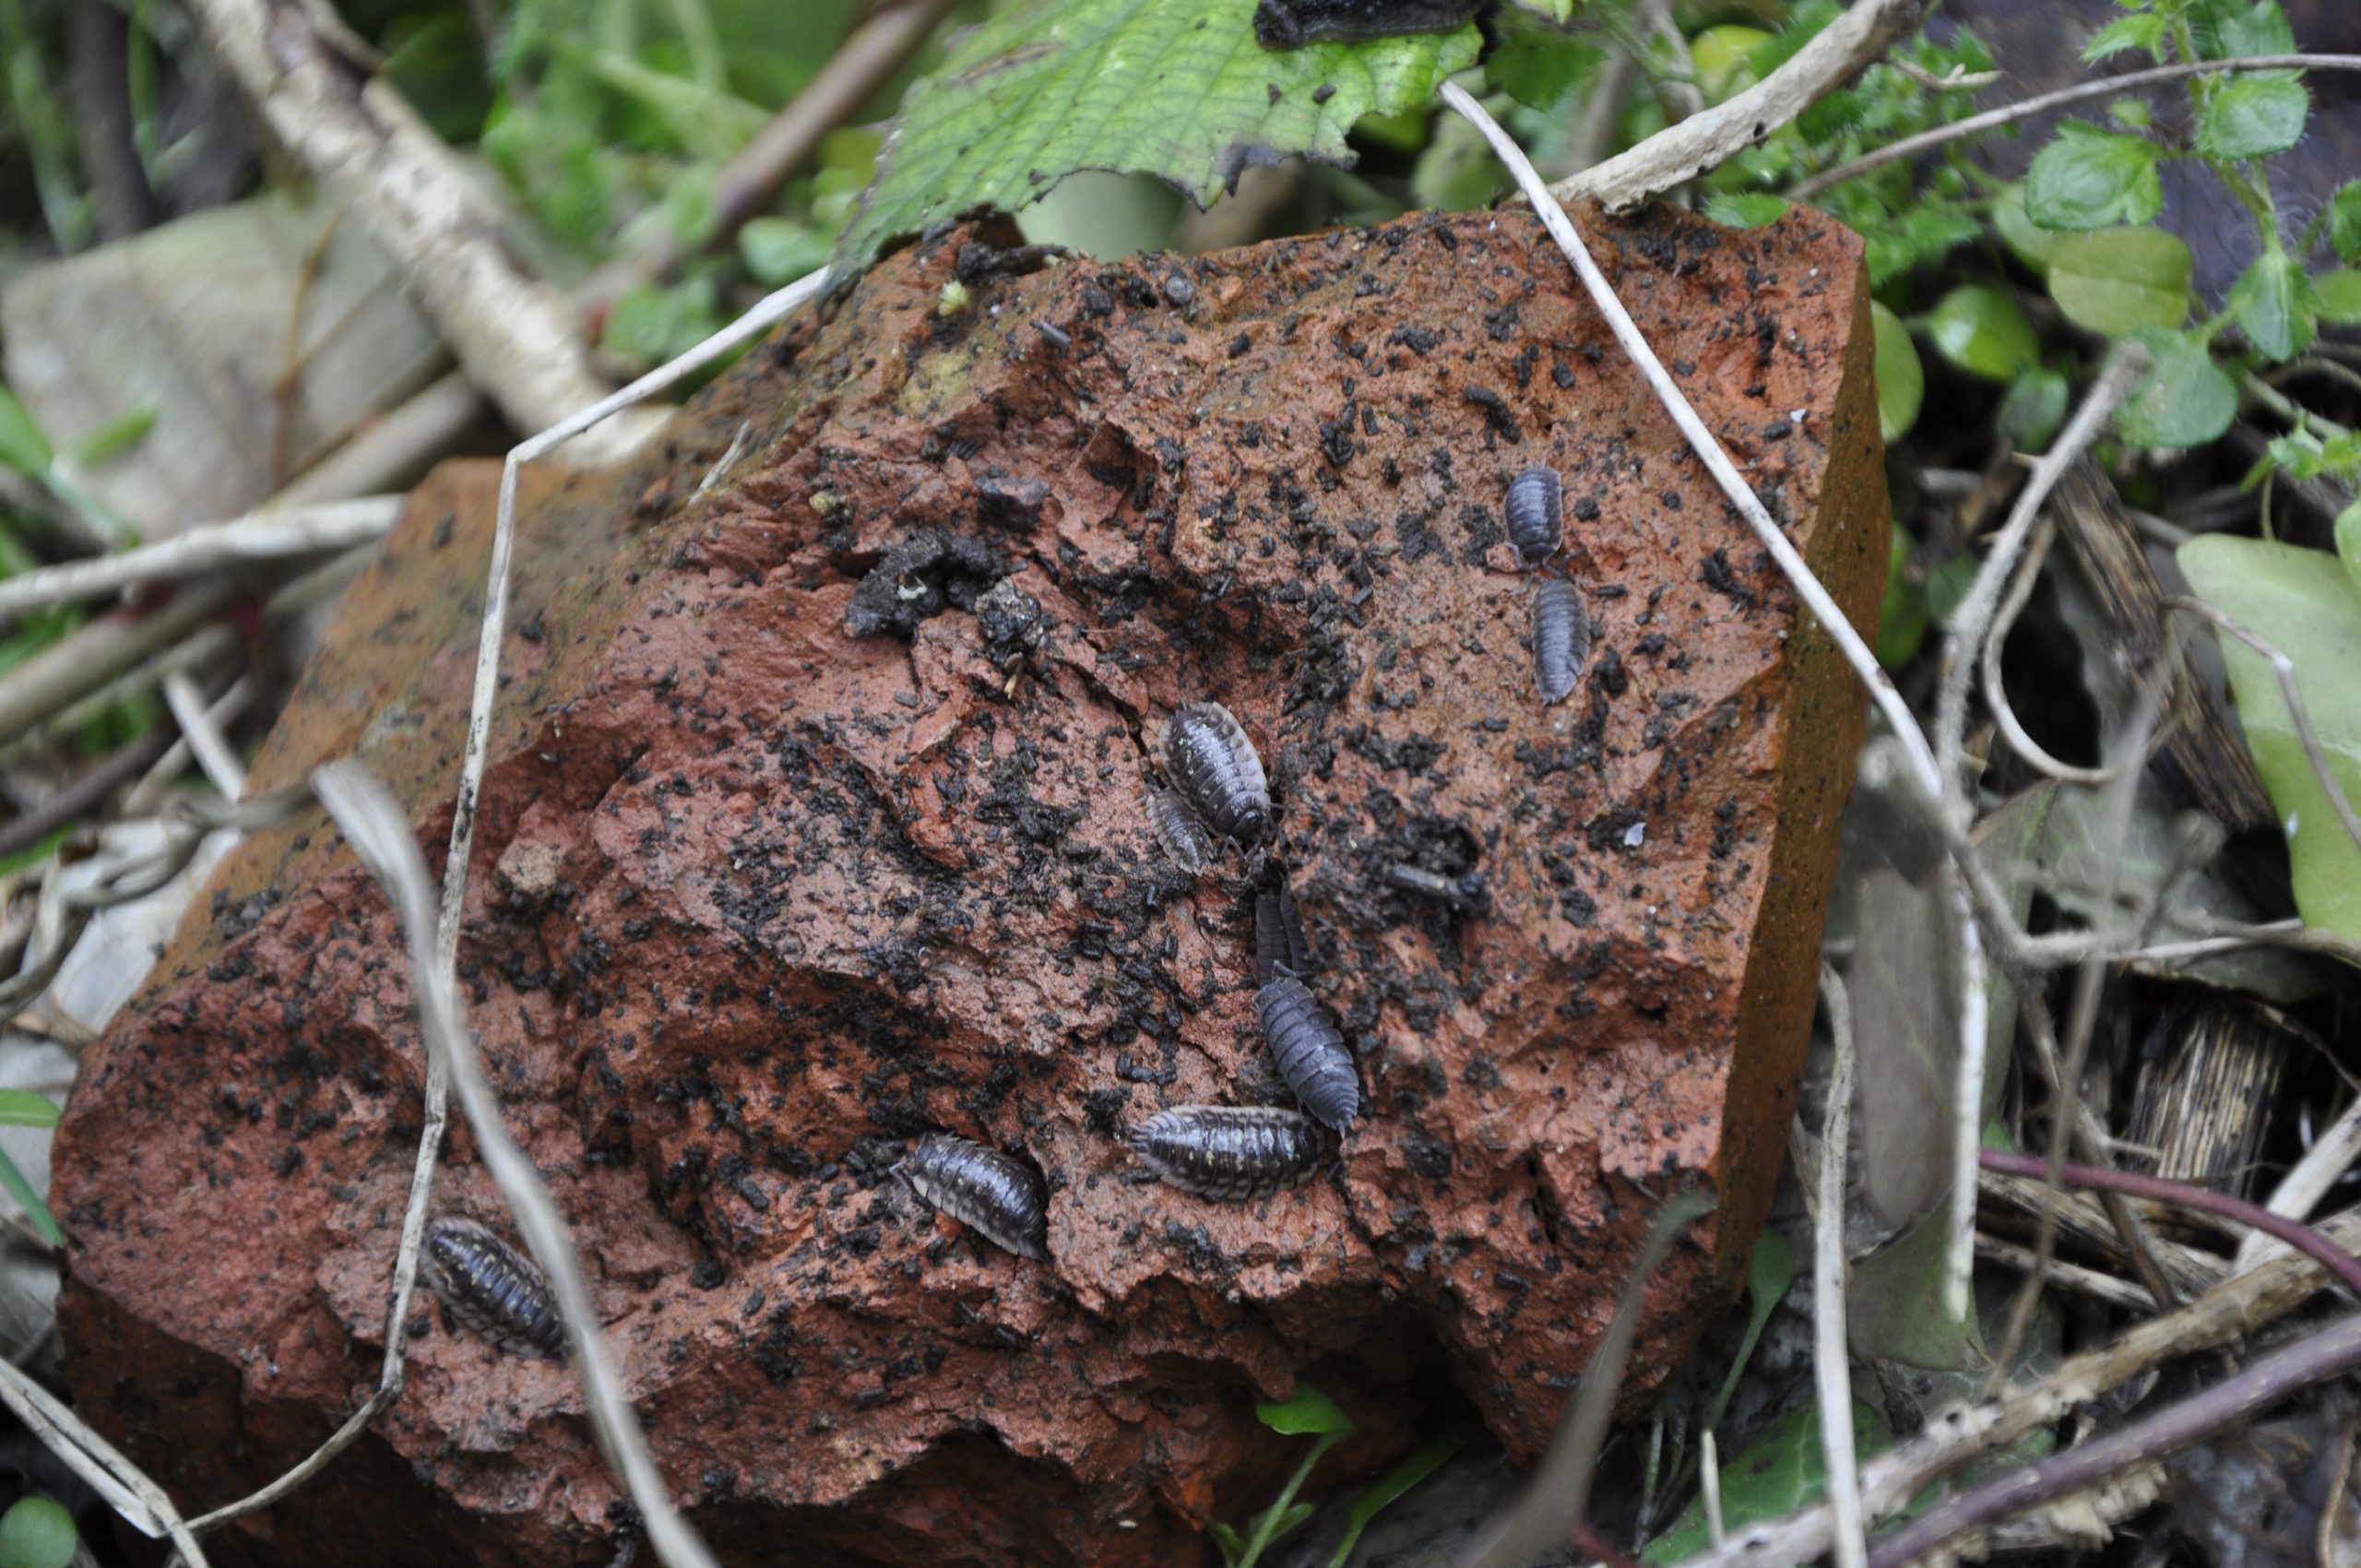 woodlice photographed close up on a red brick. Mud and undergrowth surround